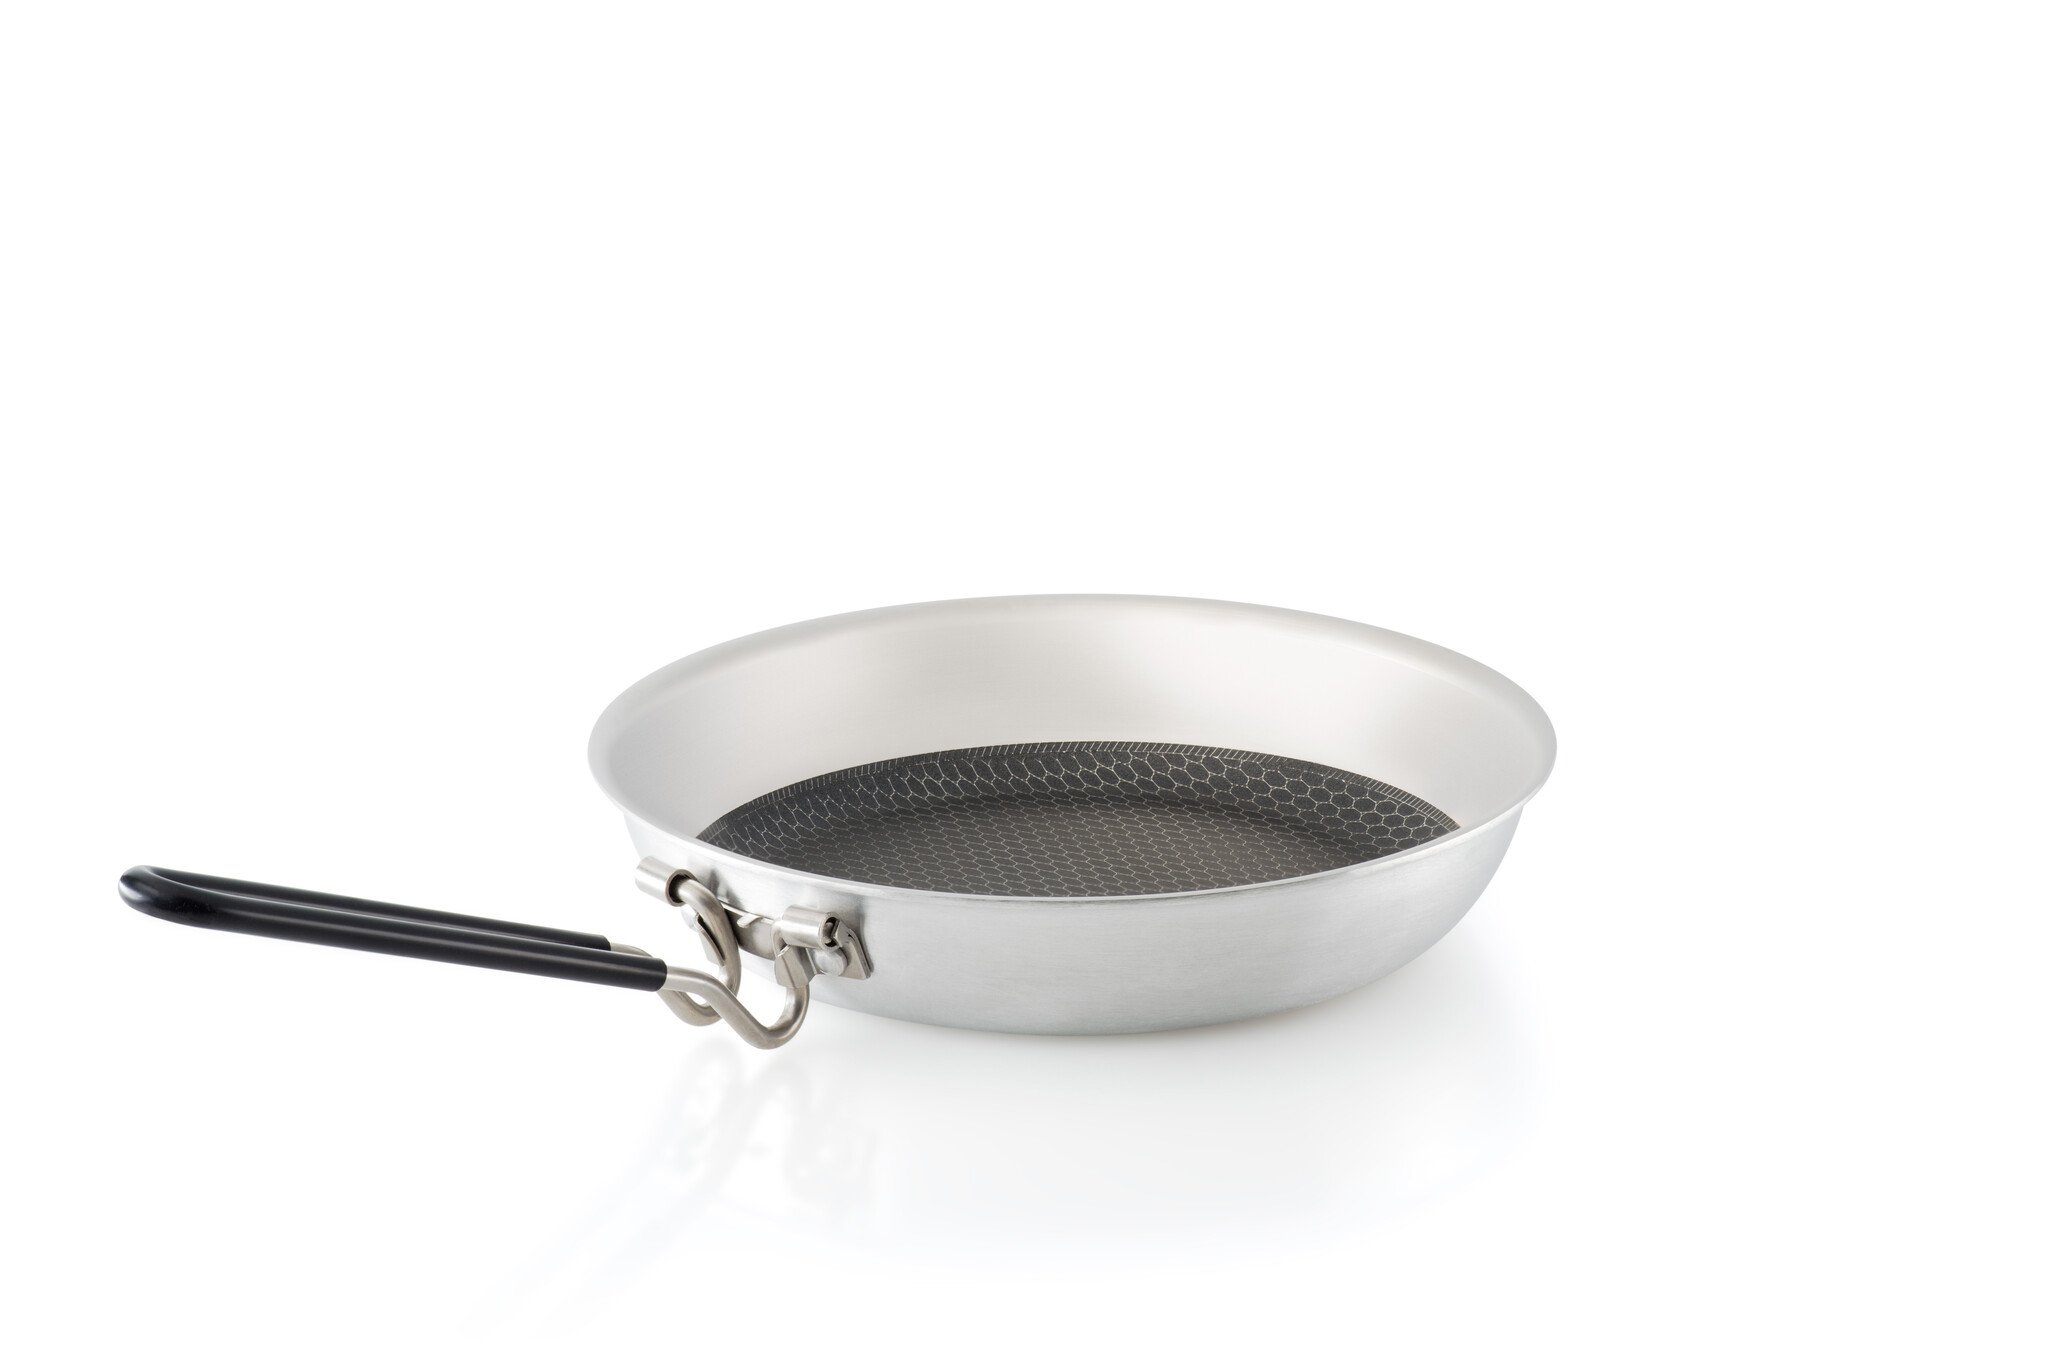 GSI Outdoors GLACIER STAINLESS STEEL Frypan - 8